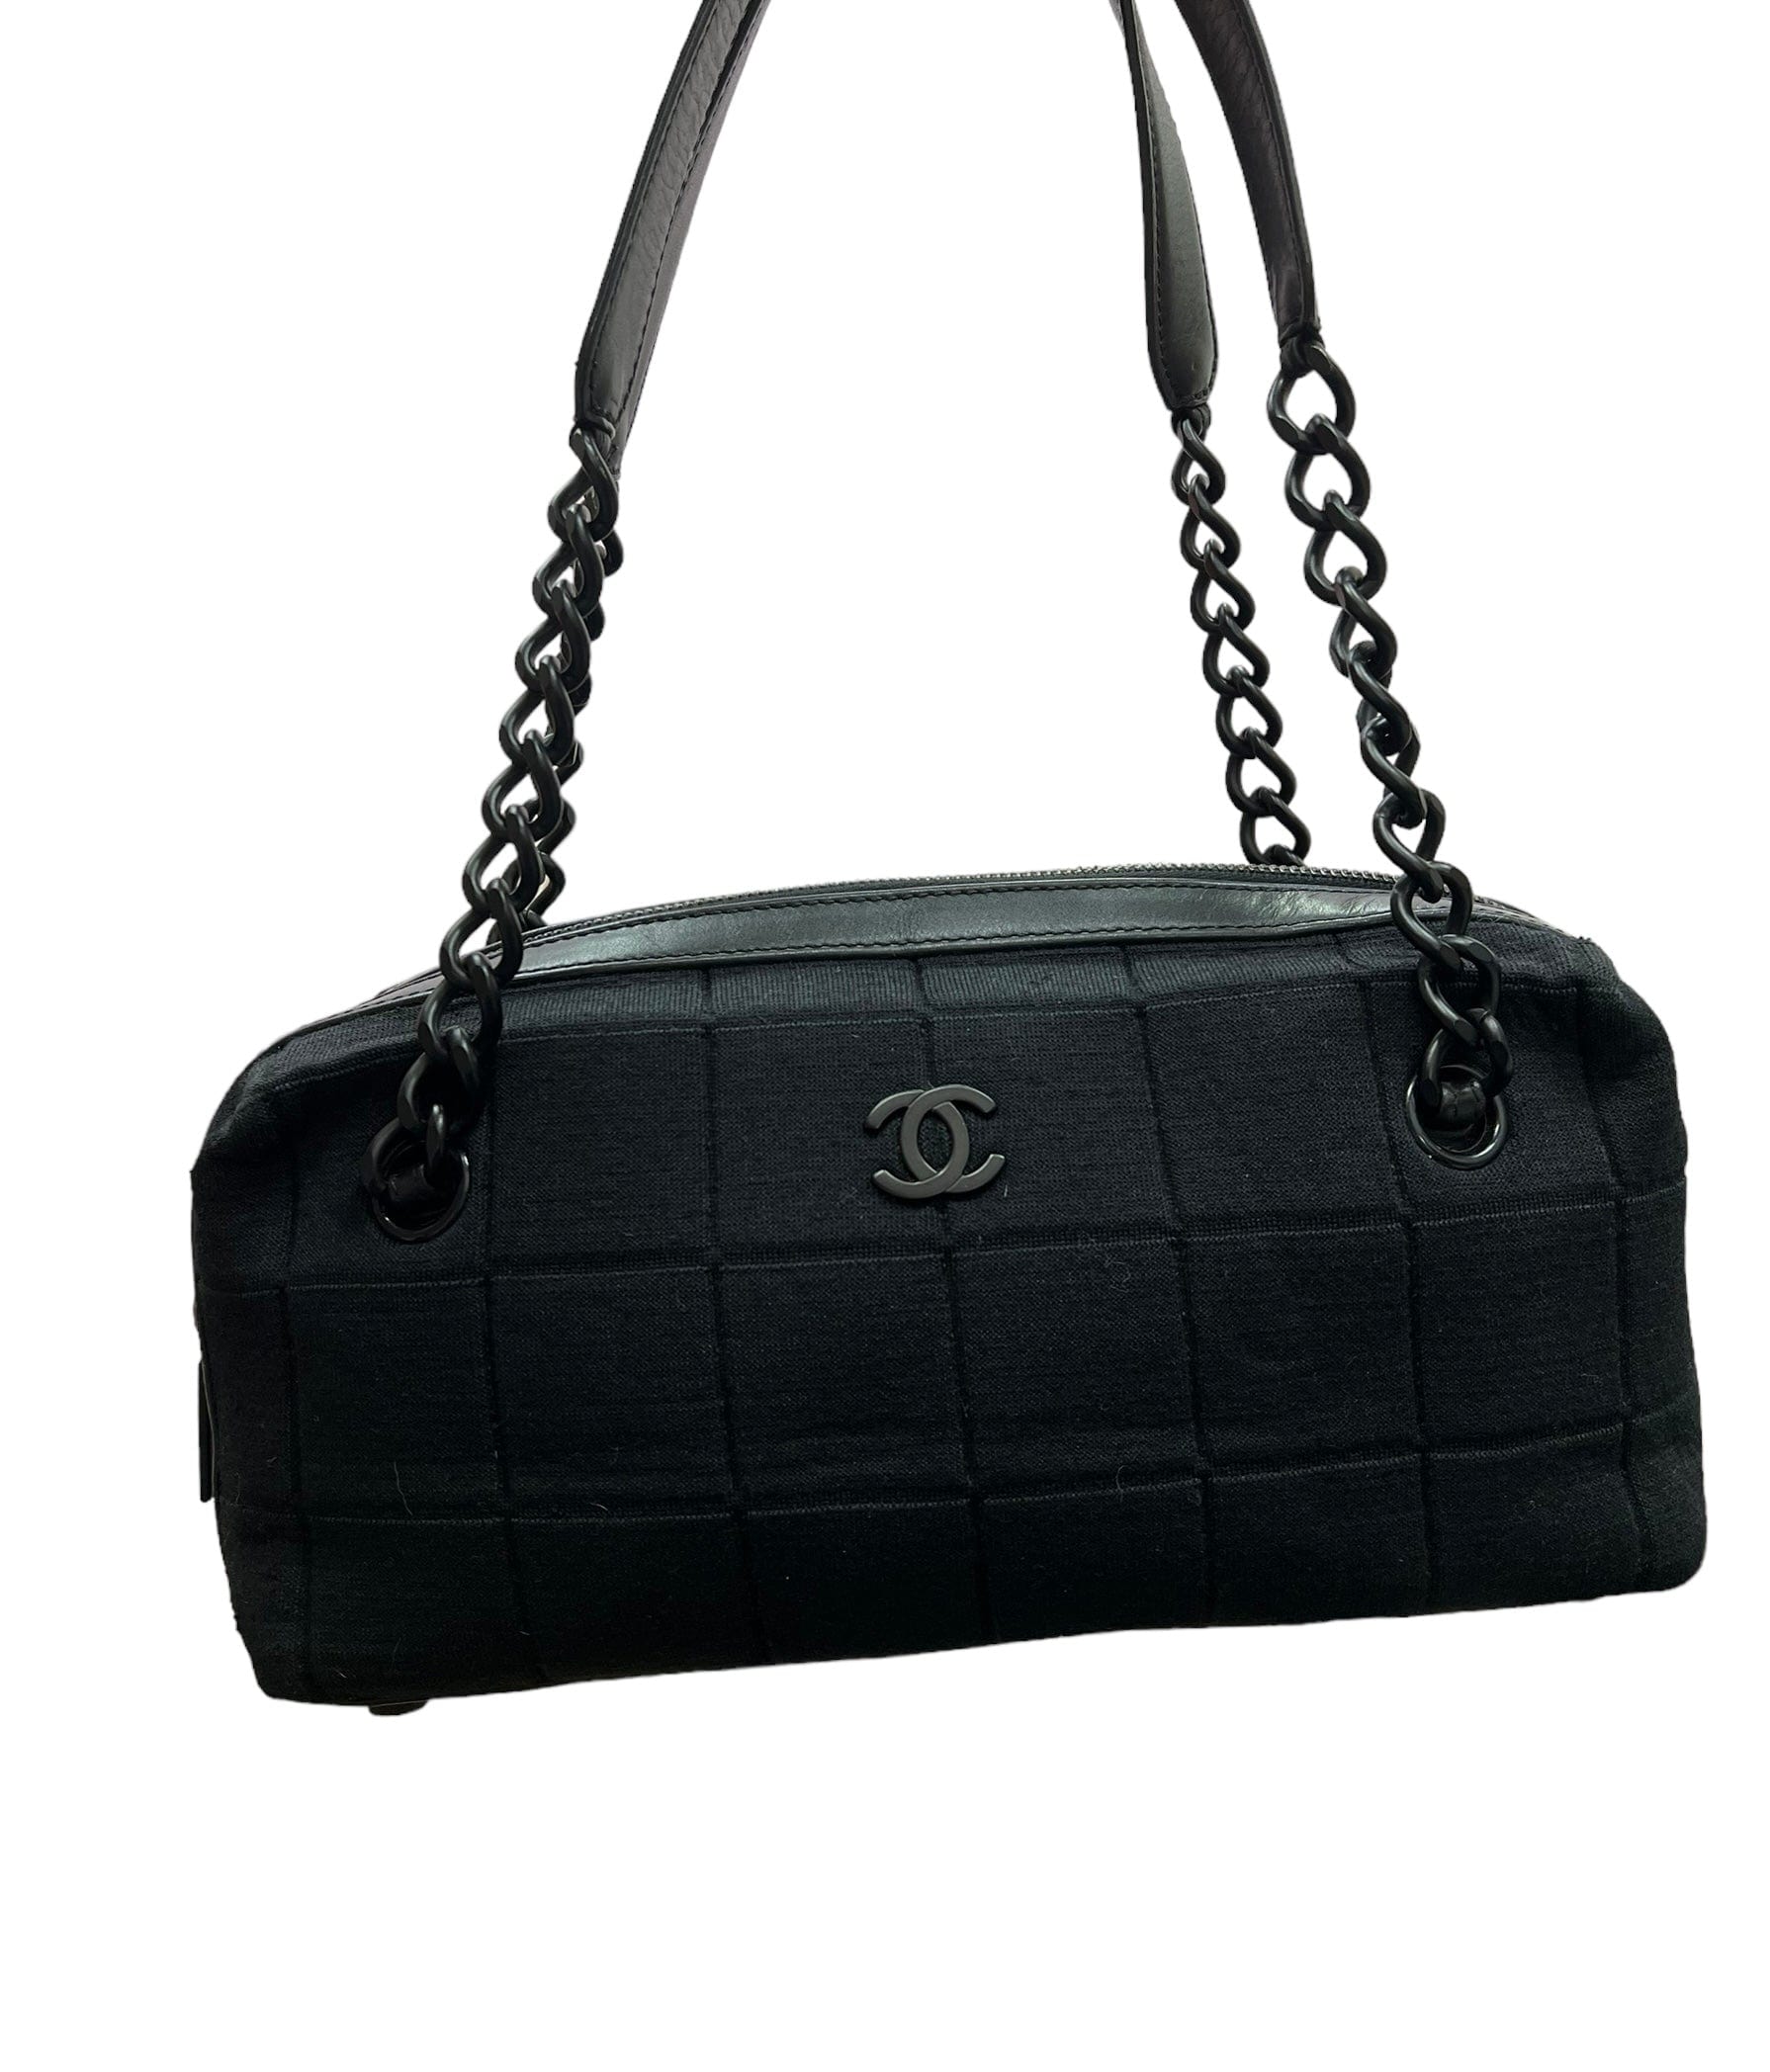 Chanel Chanel So Black Jersey Small Shoulder Bag SYC1180